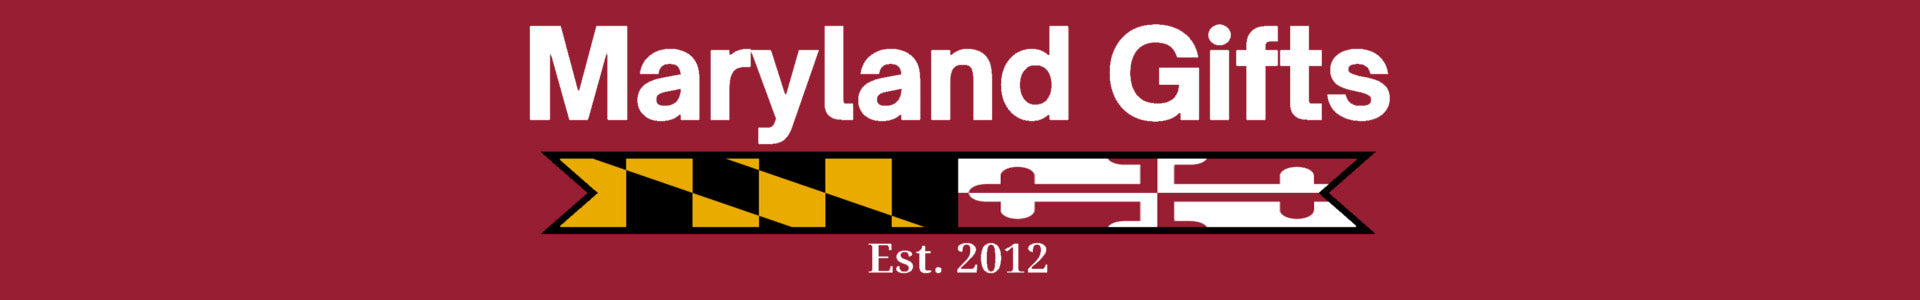 Maryland Gifts, Apparel and Accessories | Shop Maryland-Gifts.com